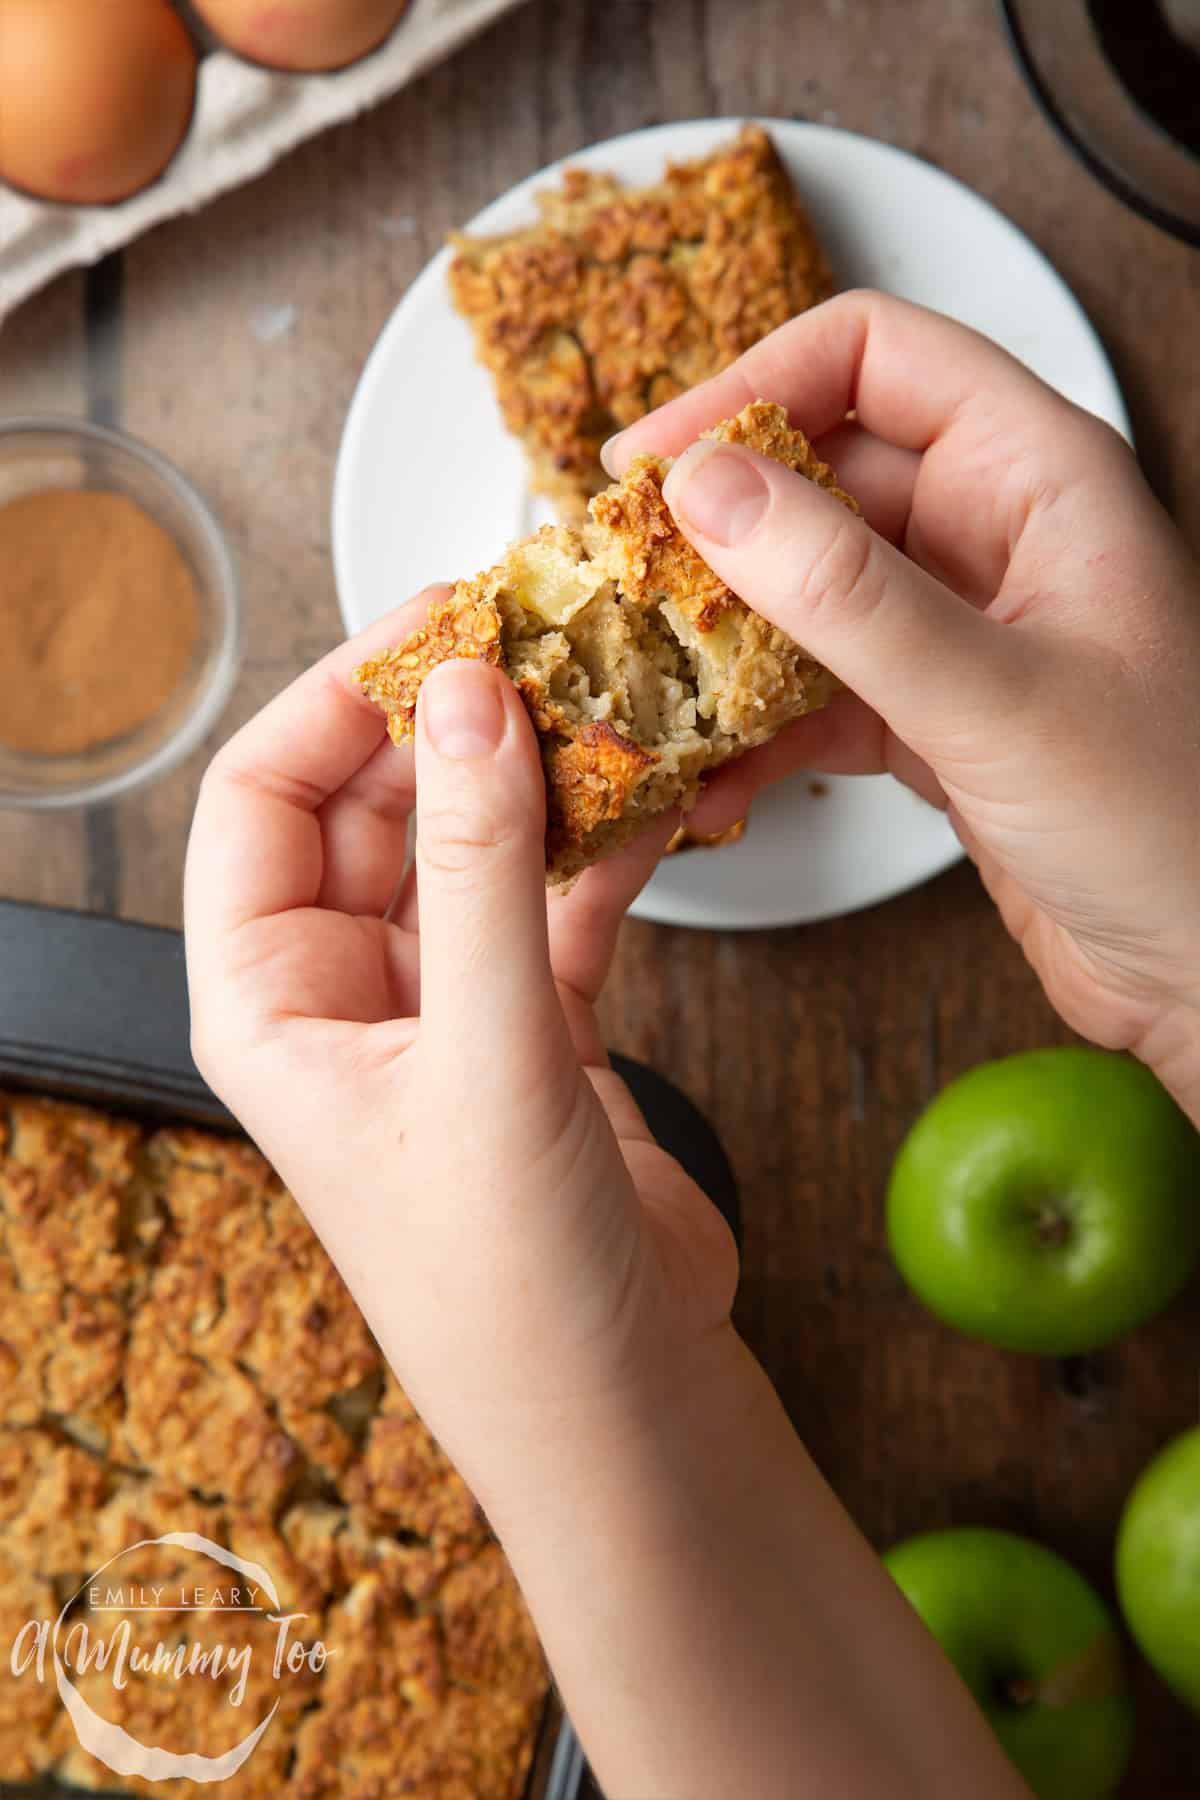 Hands breaking open a porridge square. Apples and more of the porridge squares are shown in the background.